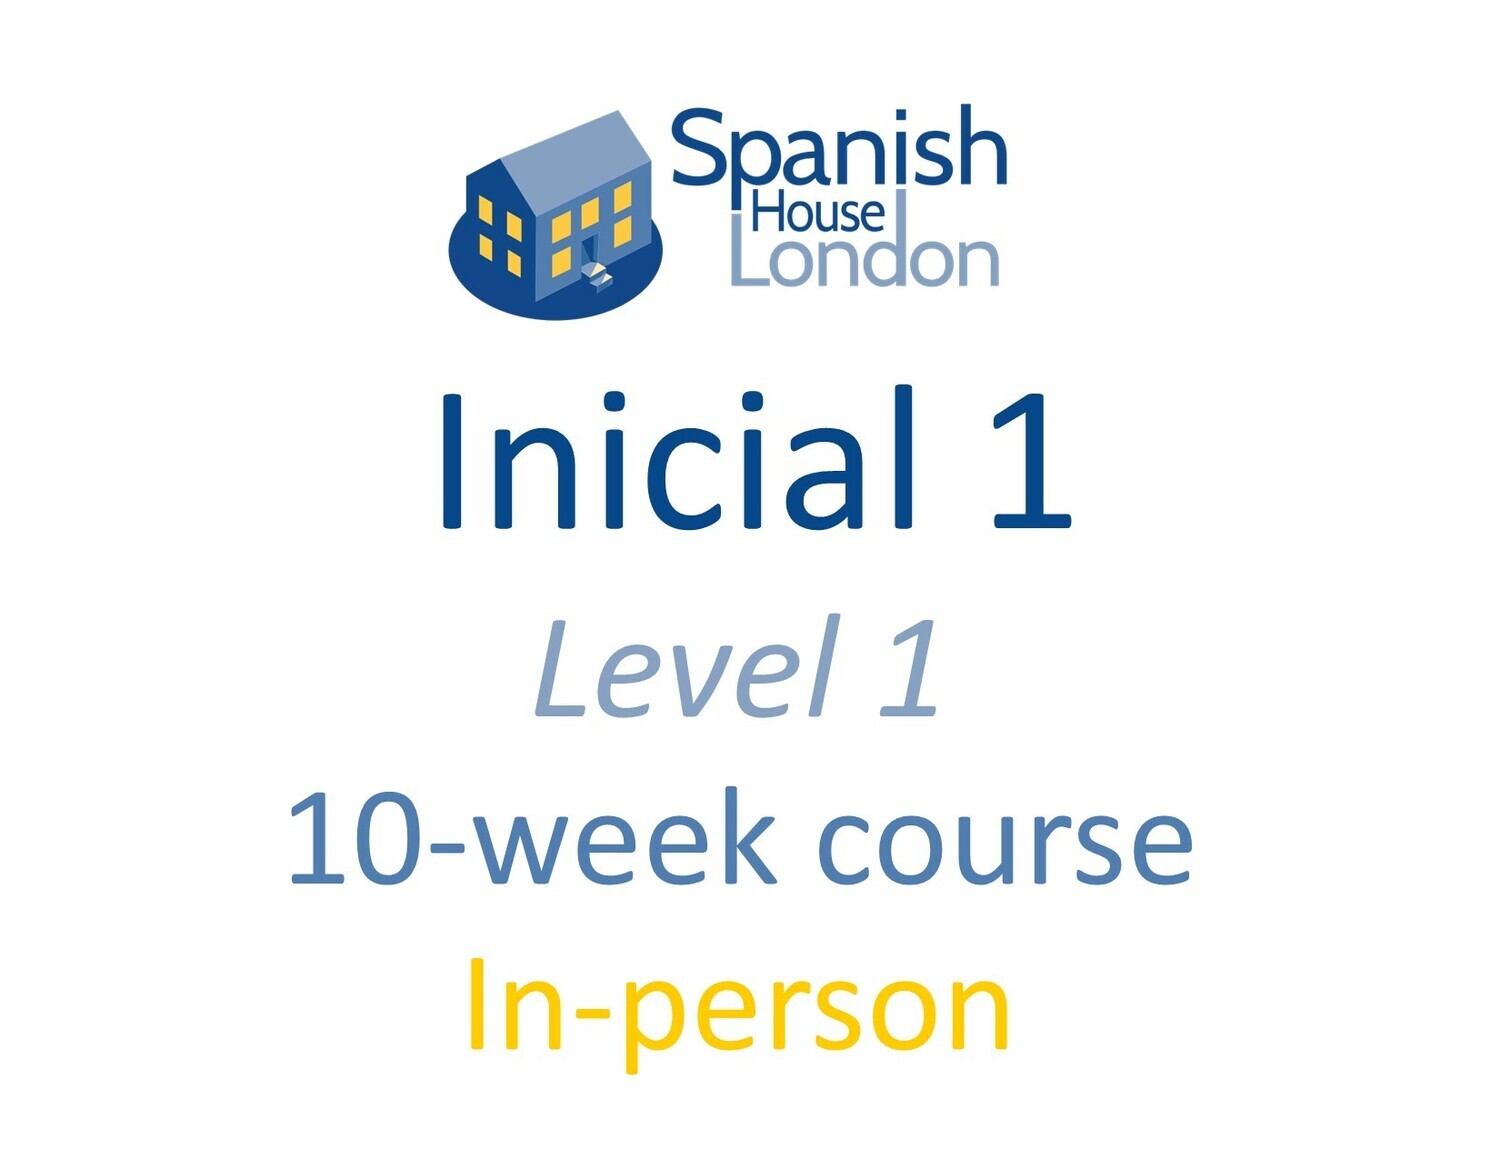 Inicial 1 Course starting on 27th September at 7.30pm in Euston / King's Cross